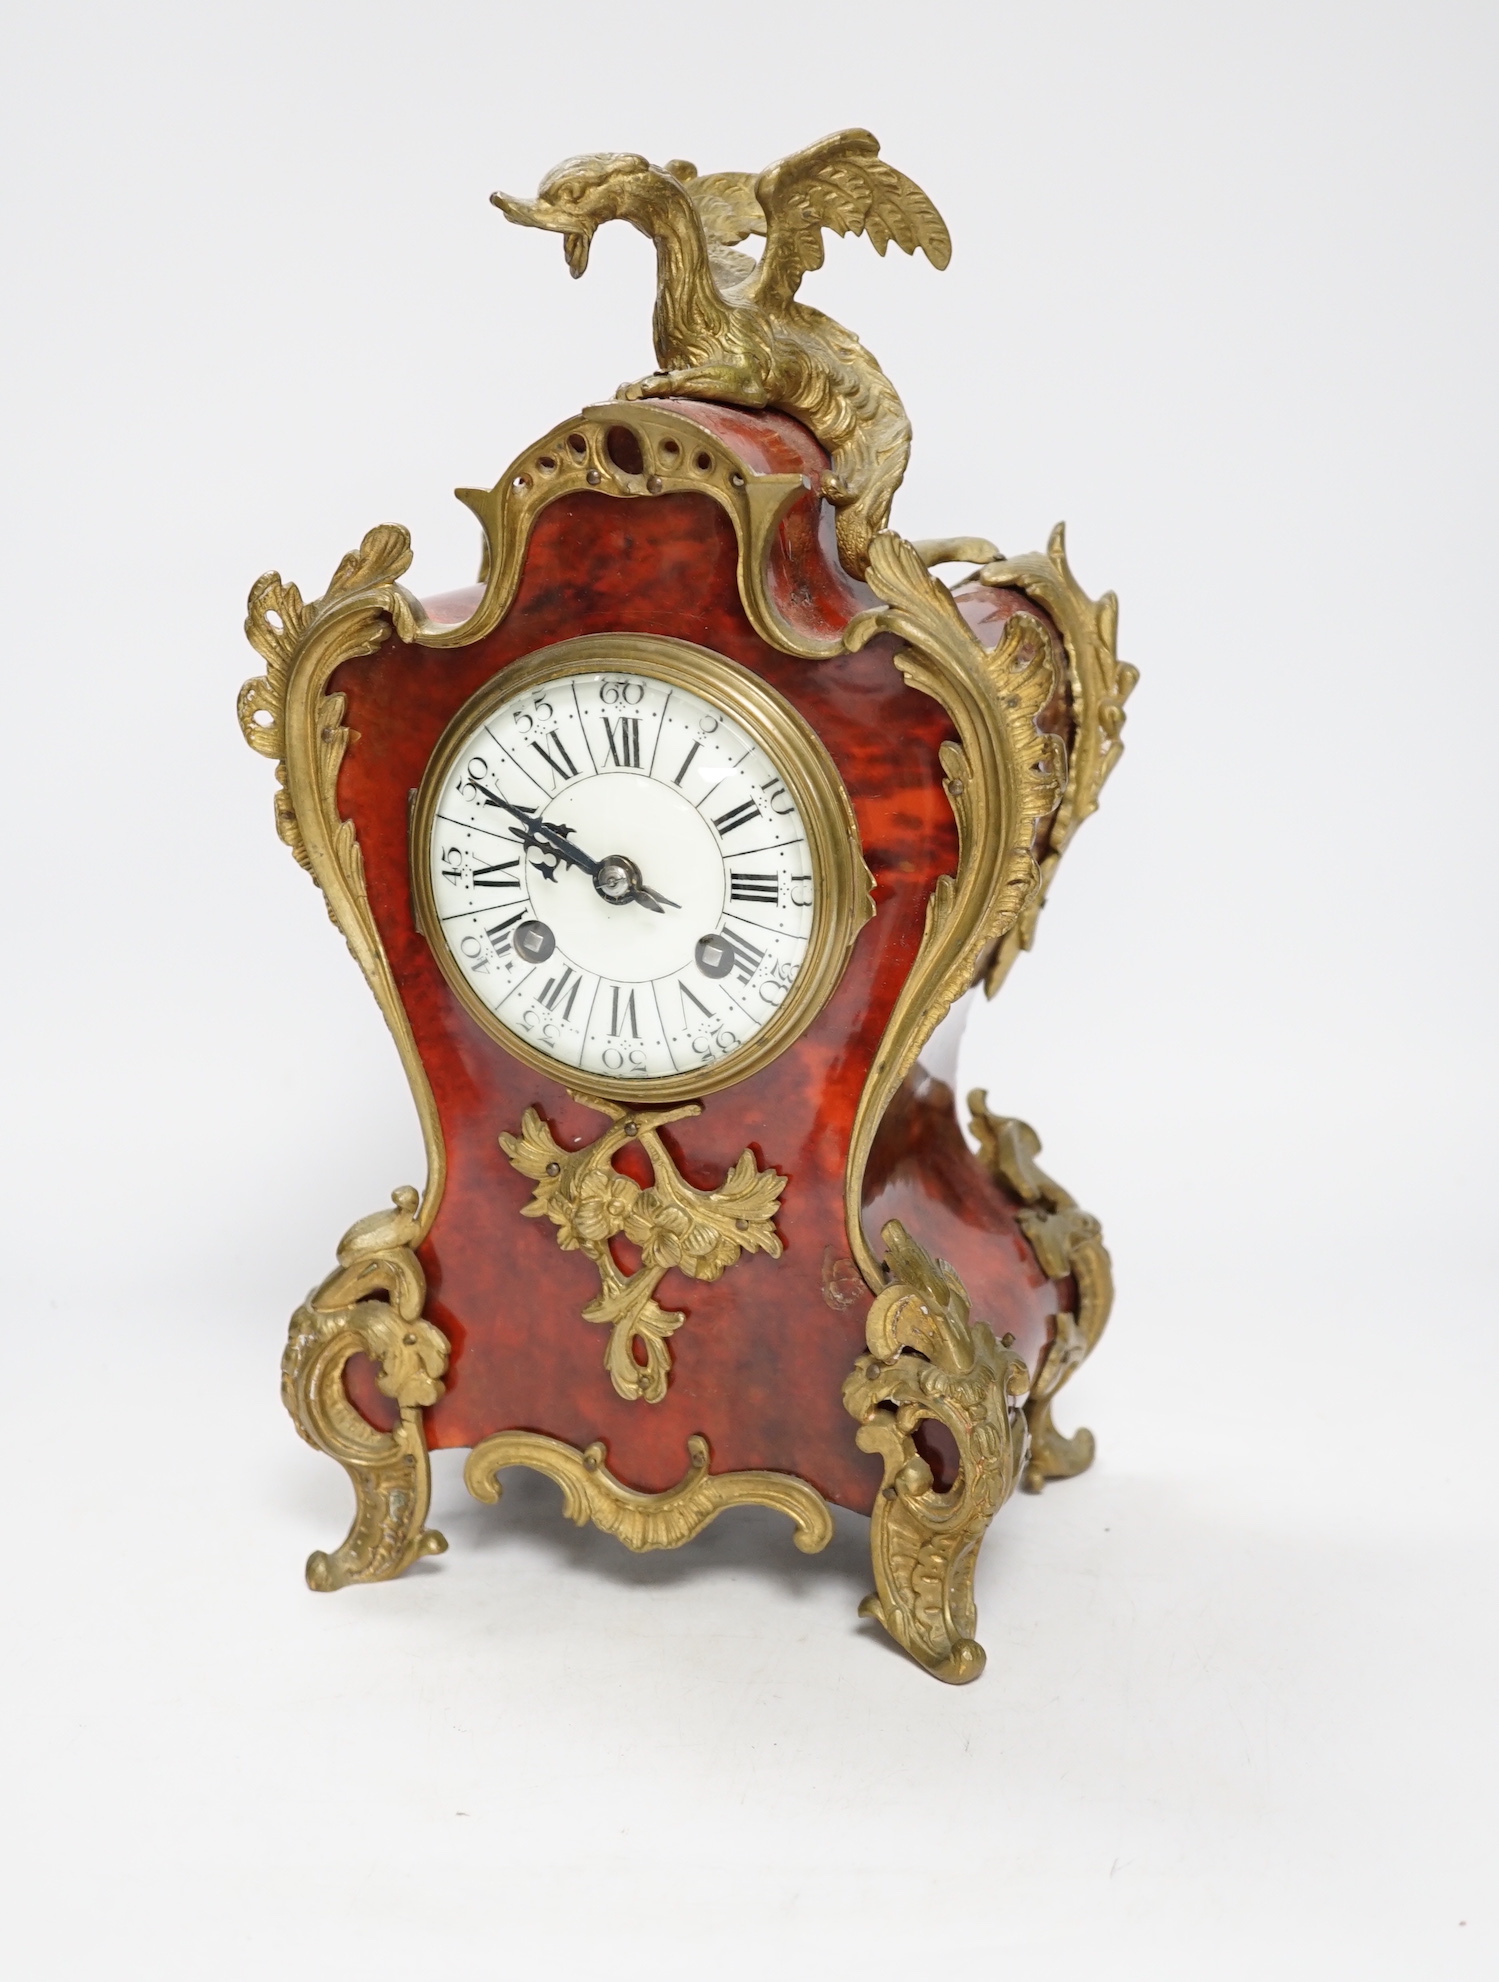 An early 20th century French tortoiseshell mantel clock with dragon mount, 30cm